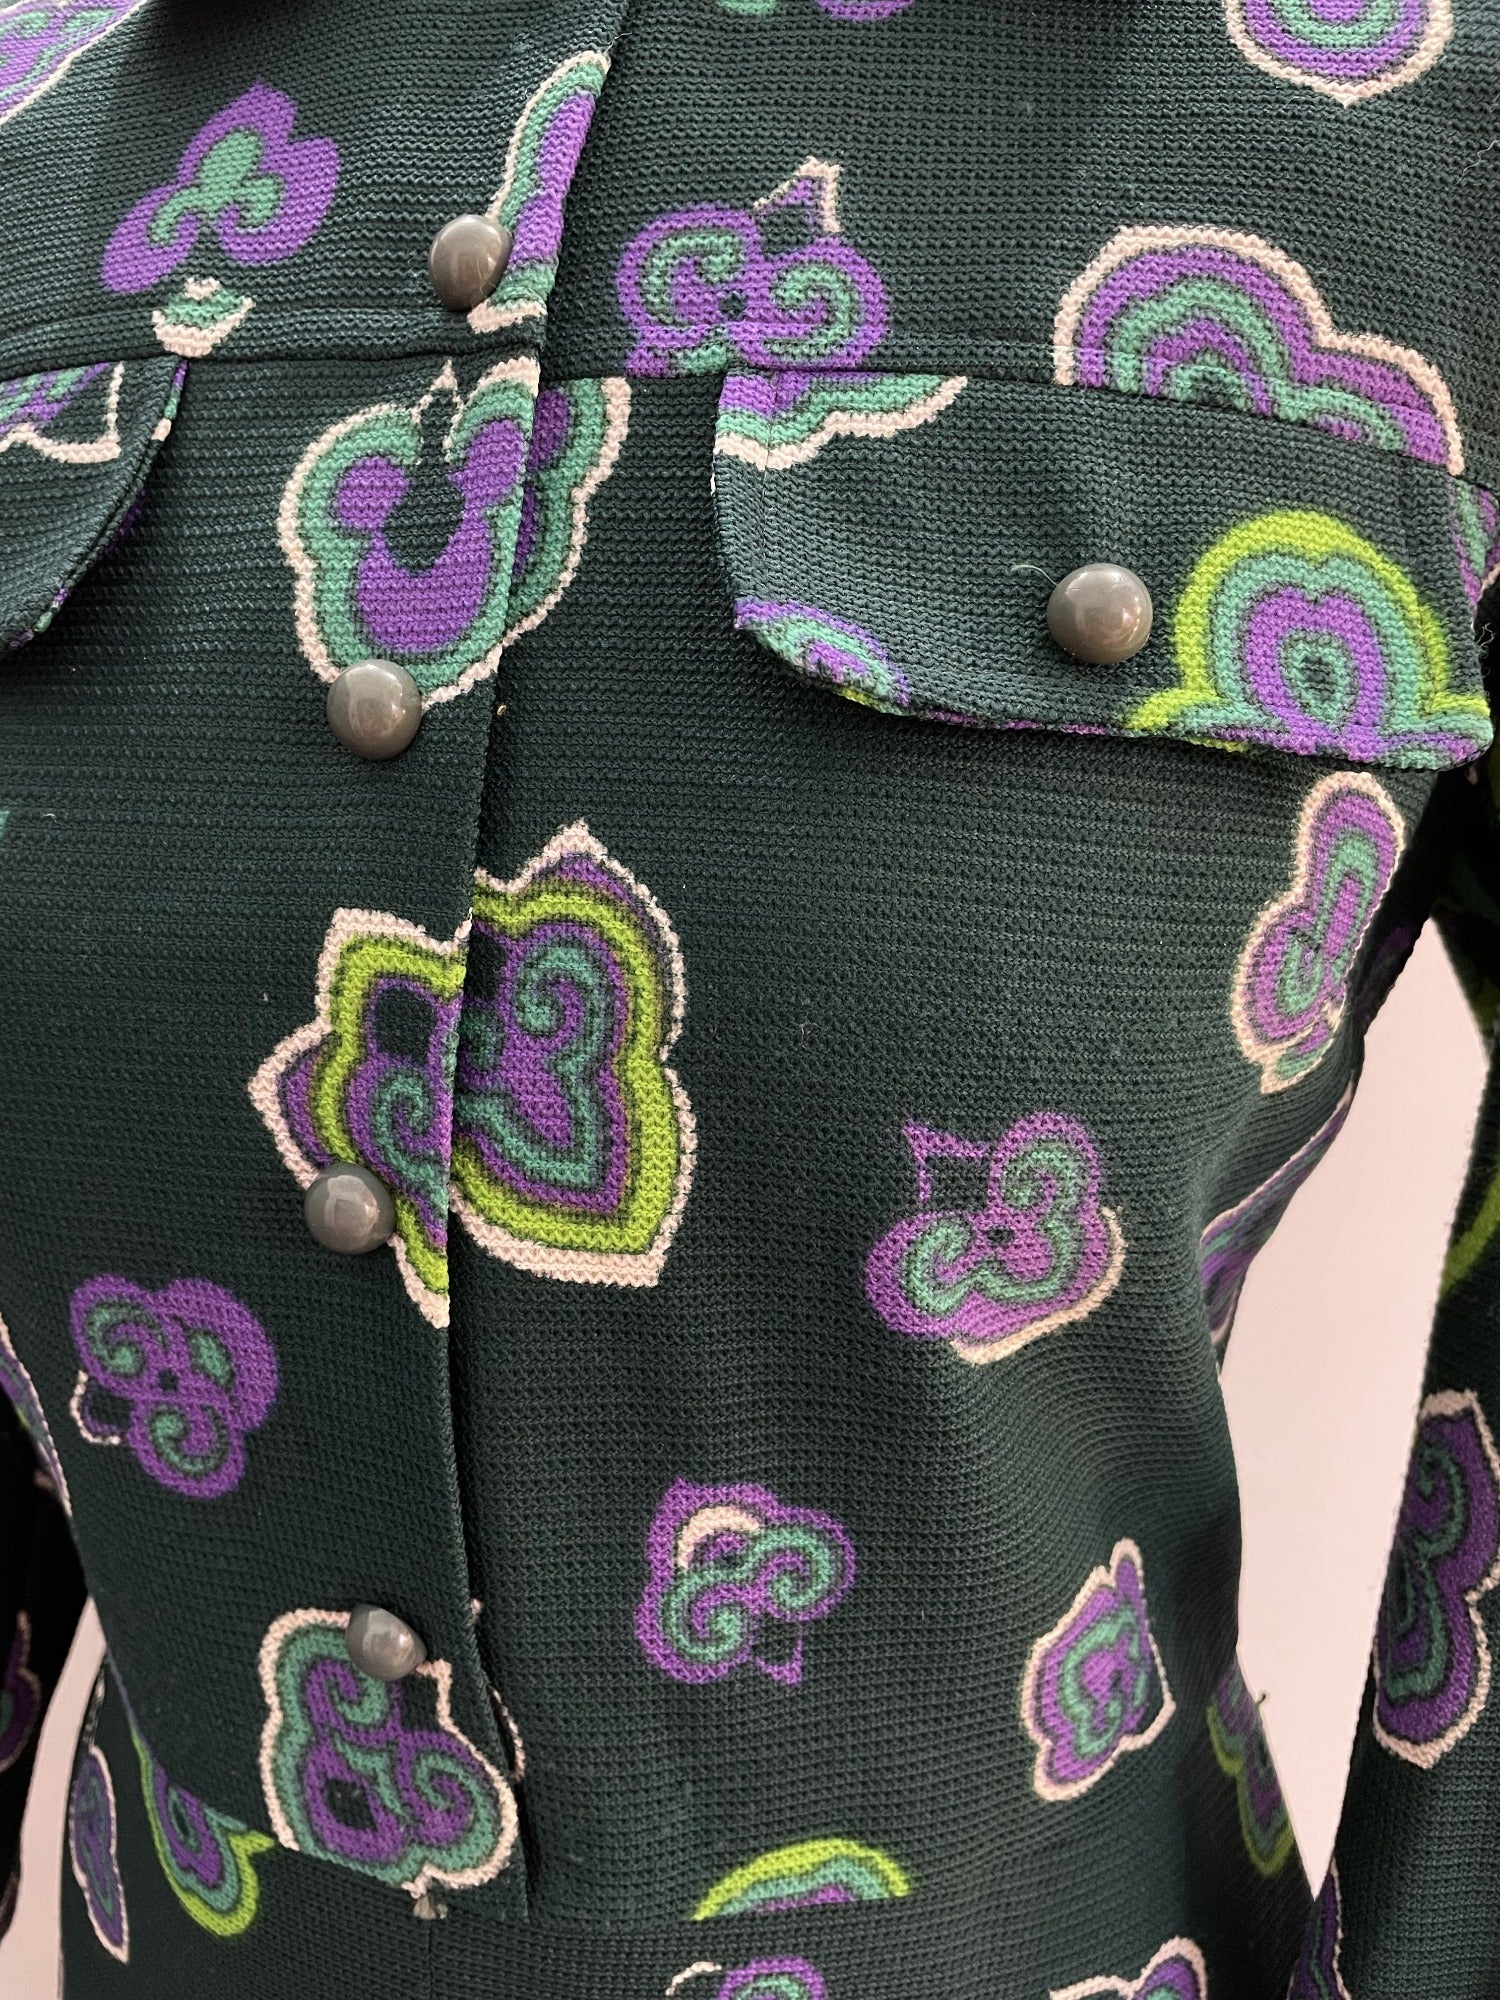 womens  vintage  retro  purple  psychedelic  psych  maxi dress  maxi  long sleeve  hippy  hippie  green  festival  dress  70s  1970s  12  Online store